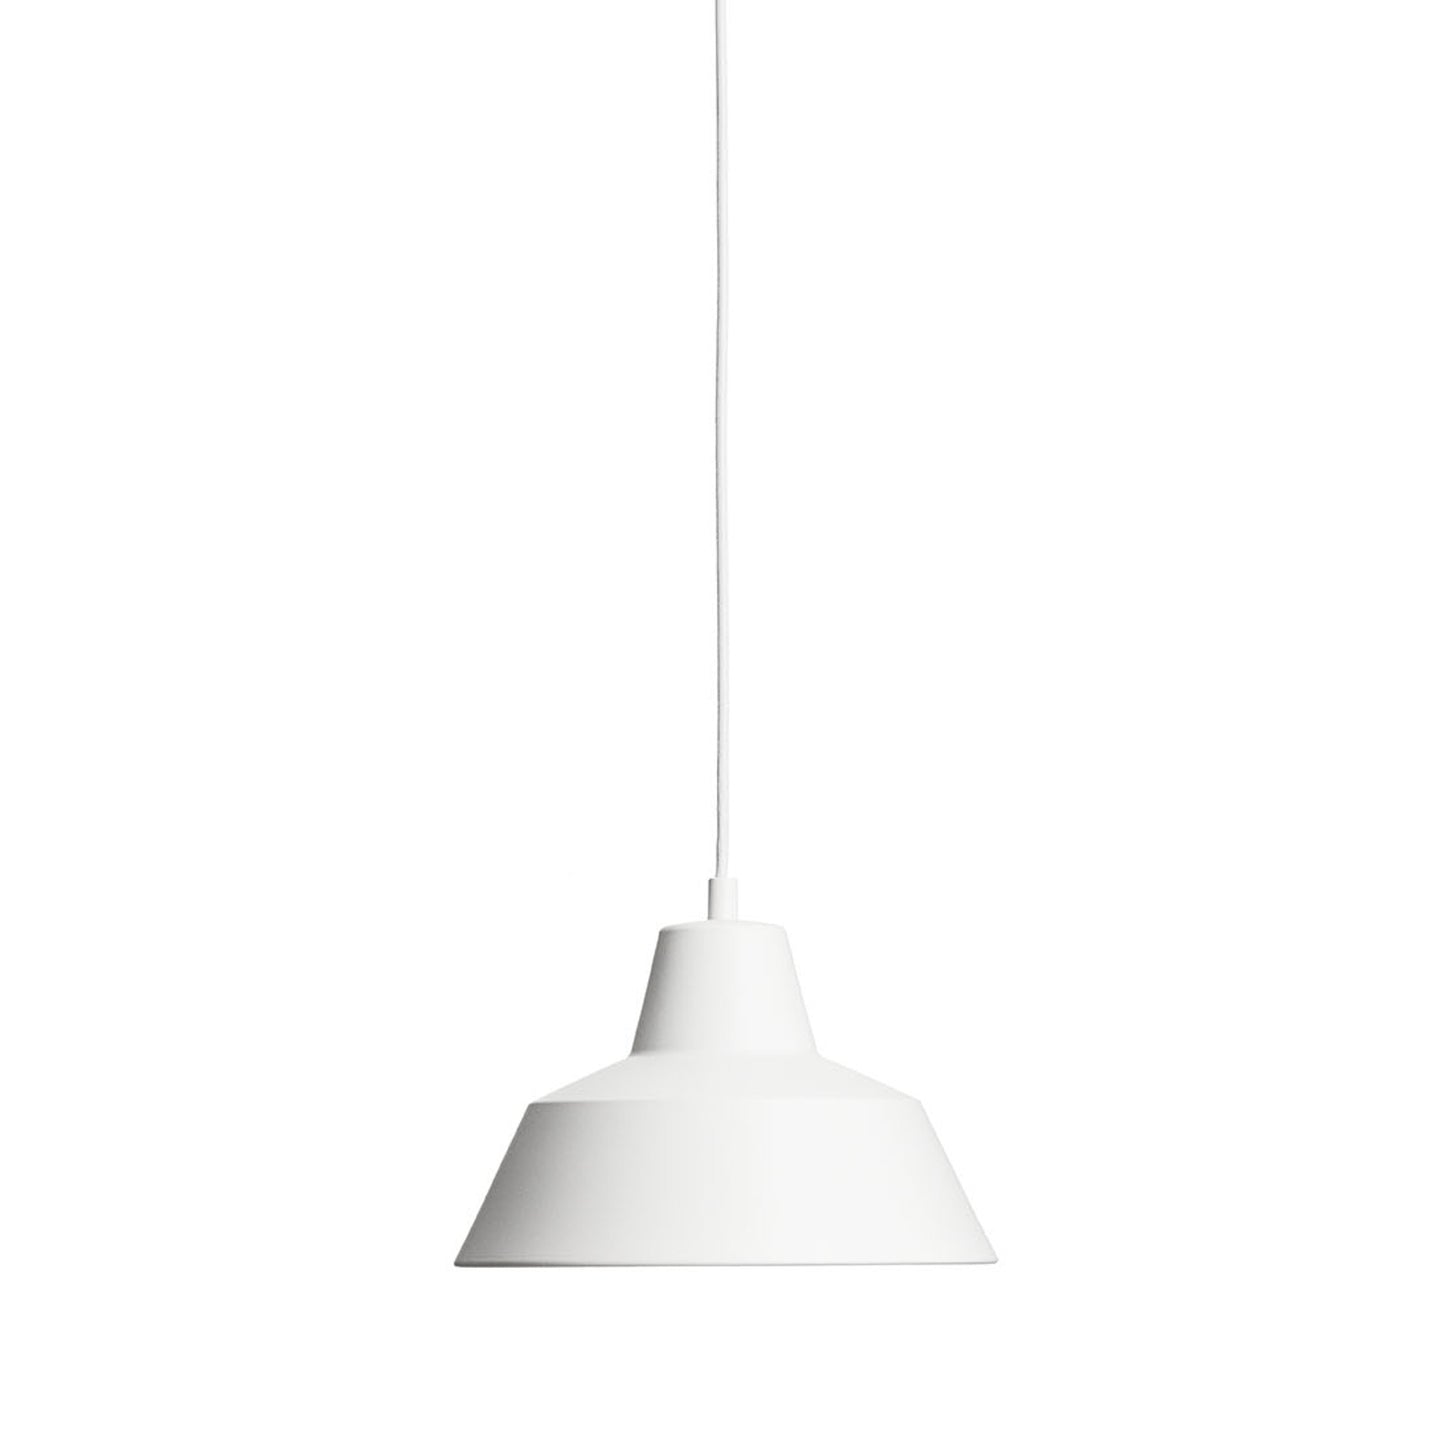 Workshop Lamp Pendant Lamp W2 by Made By Hand #Mat White